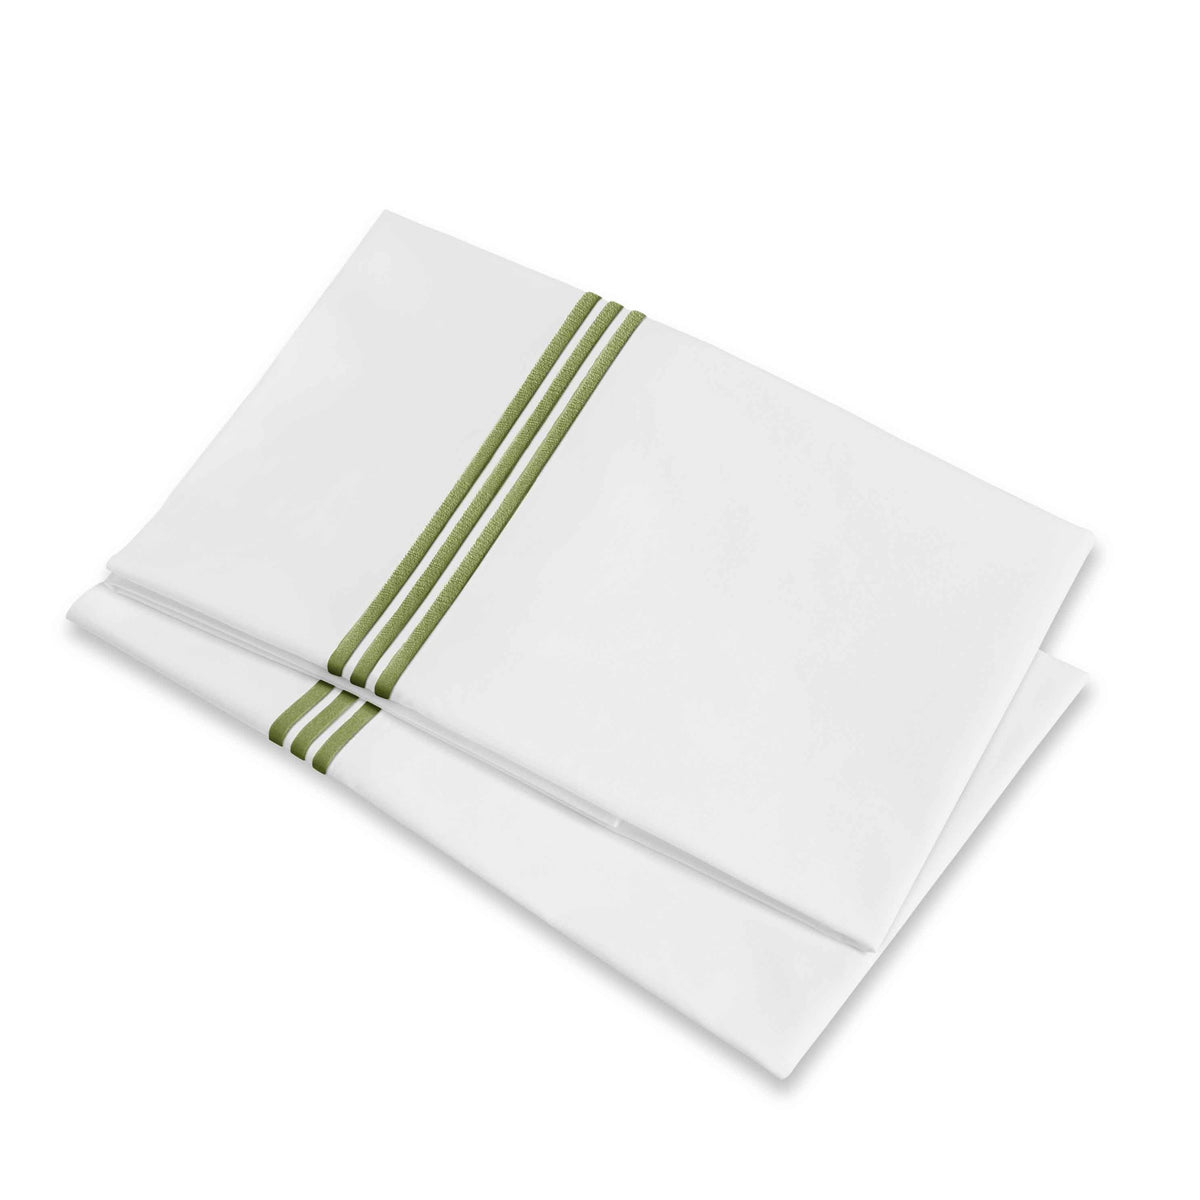 Folded Pillowcases of Signoria Platinum Percale Bedding in White/Moss Green Color